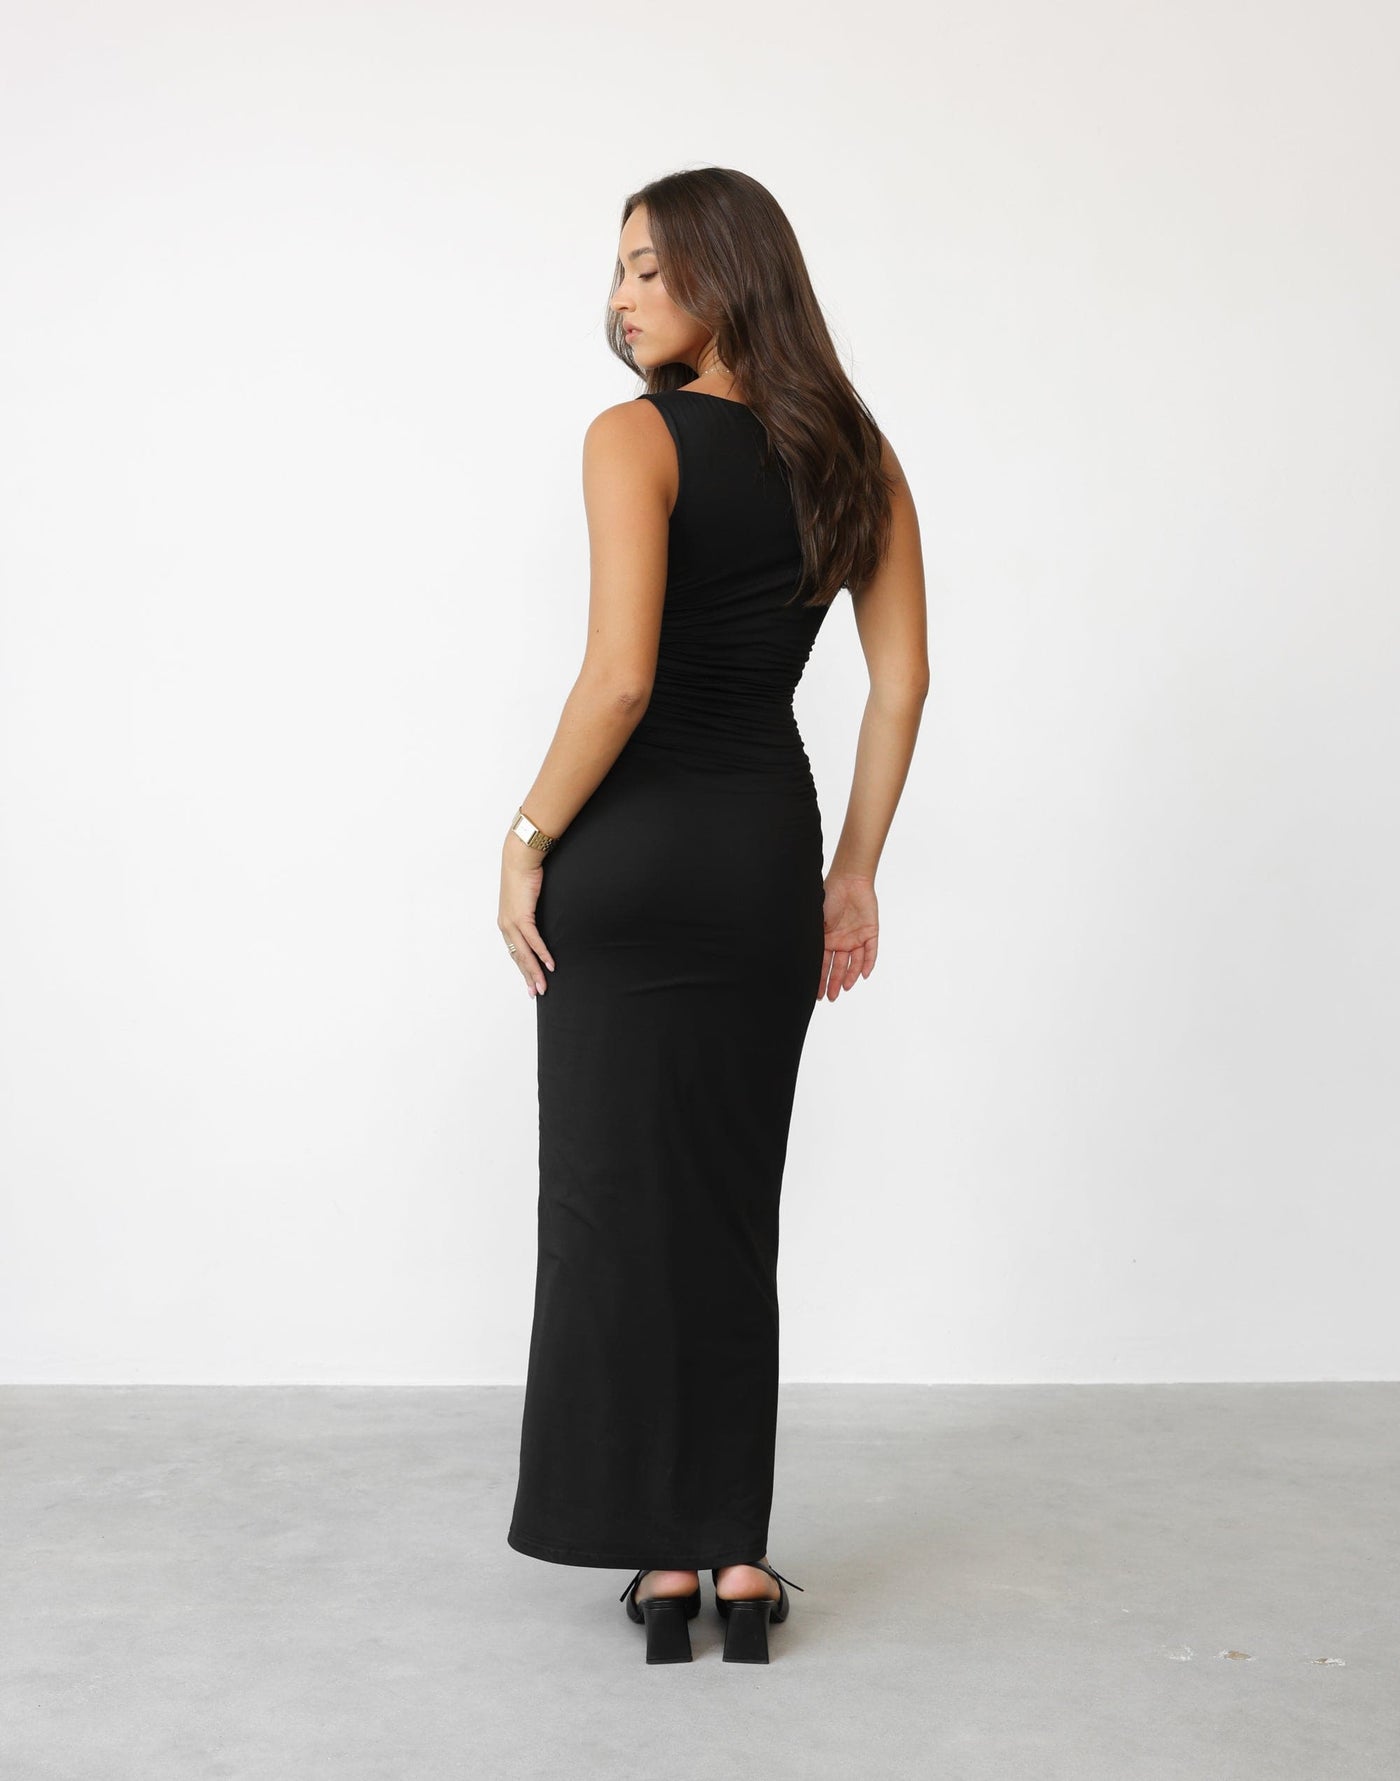 Caprice Maxi Dress (Black) | CHARCOAL Exclusive - Bodycon High Straight Neck Ruched Side Maxi Dress - Women's Dress - Charcoal Clothing